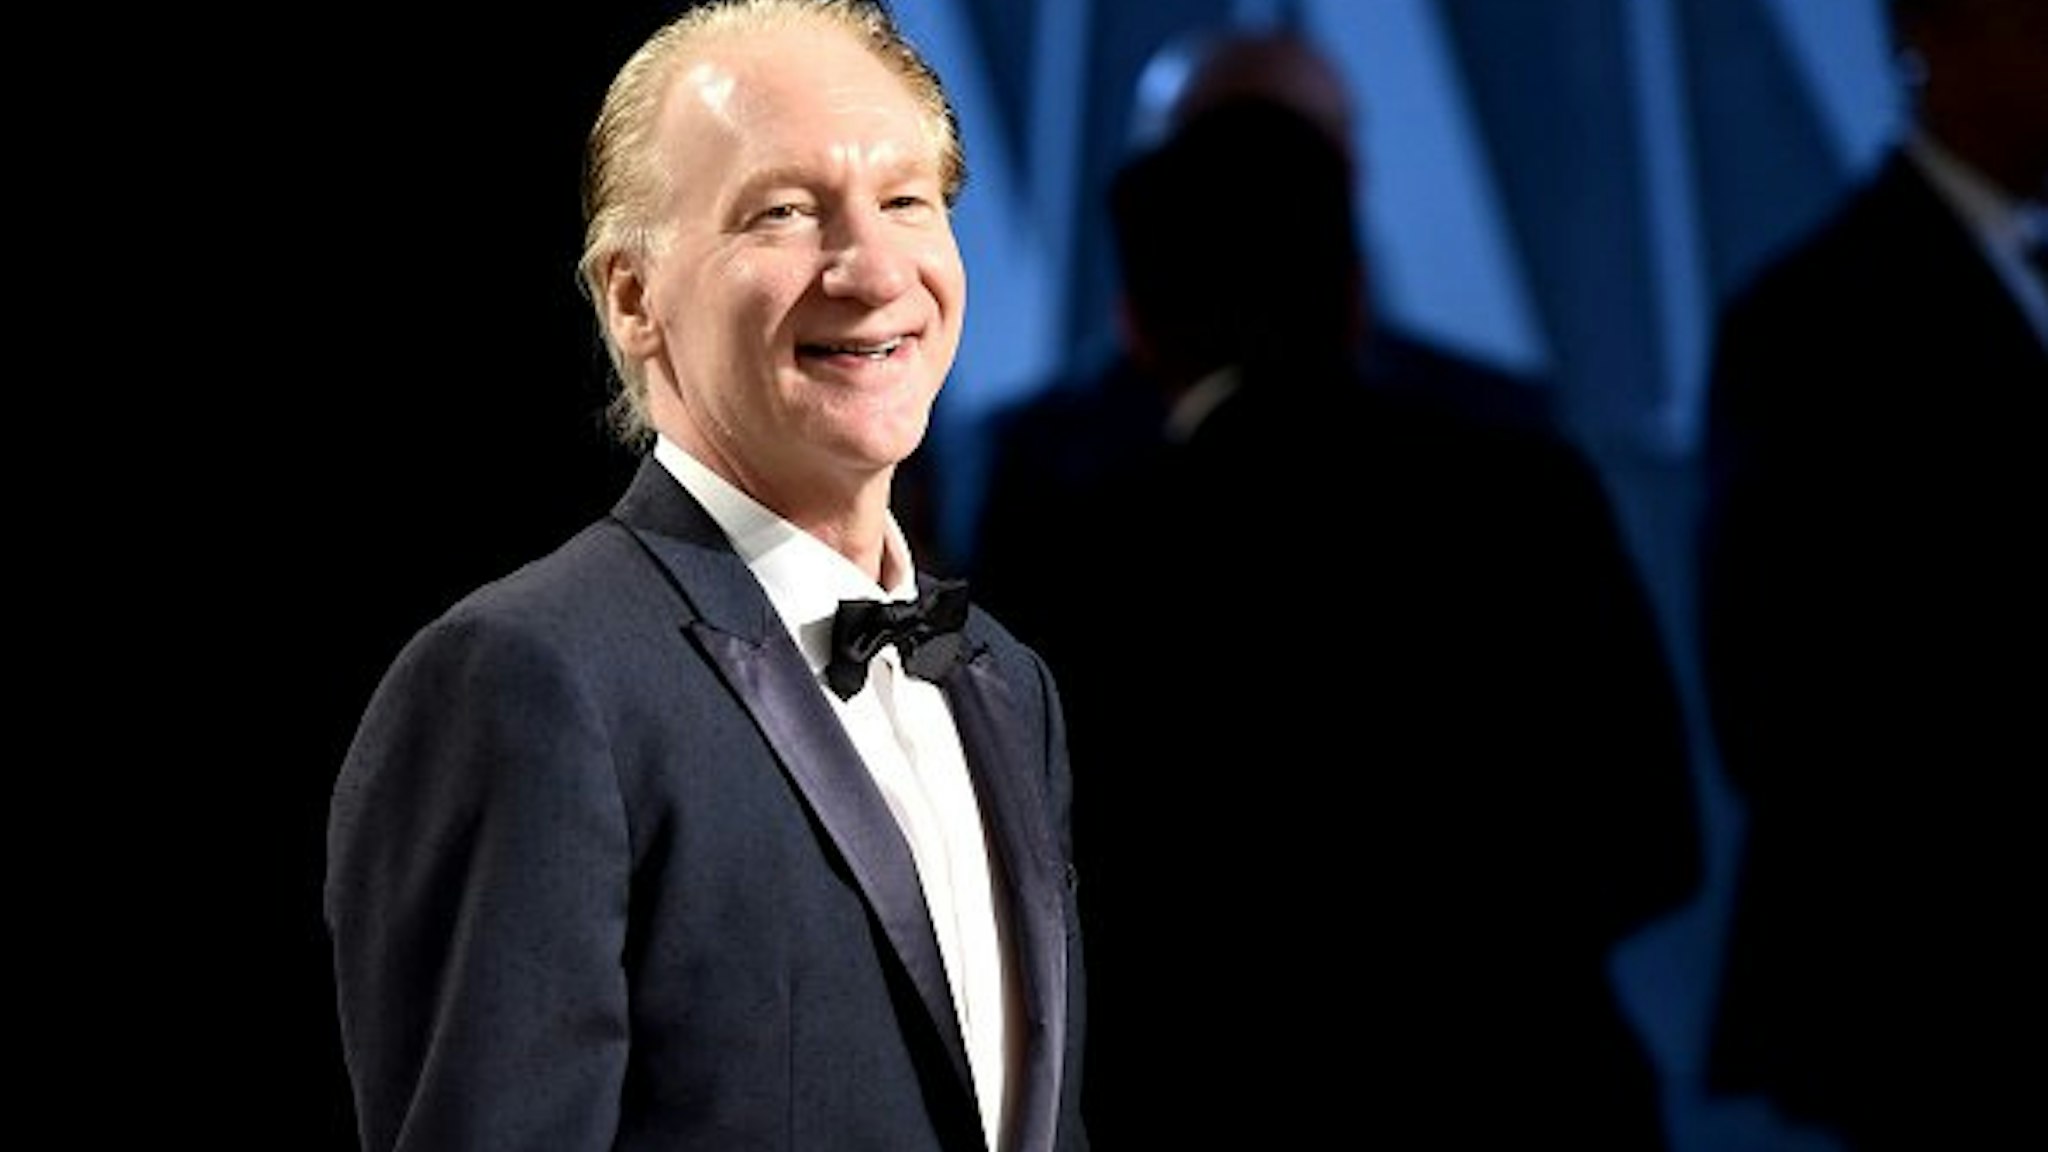 Television personality Bill Maher attends the 2017 Vanity Fair Oscar Party hosted by Graydon Carter at Wallis Annenberg Center for the Performing Arts on February 26, 2017 in Beverly Hills, California